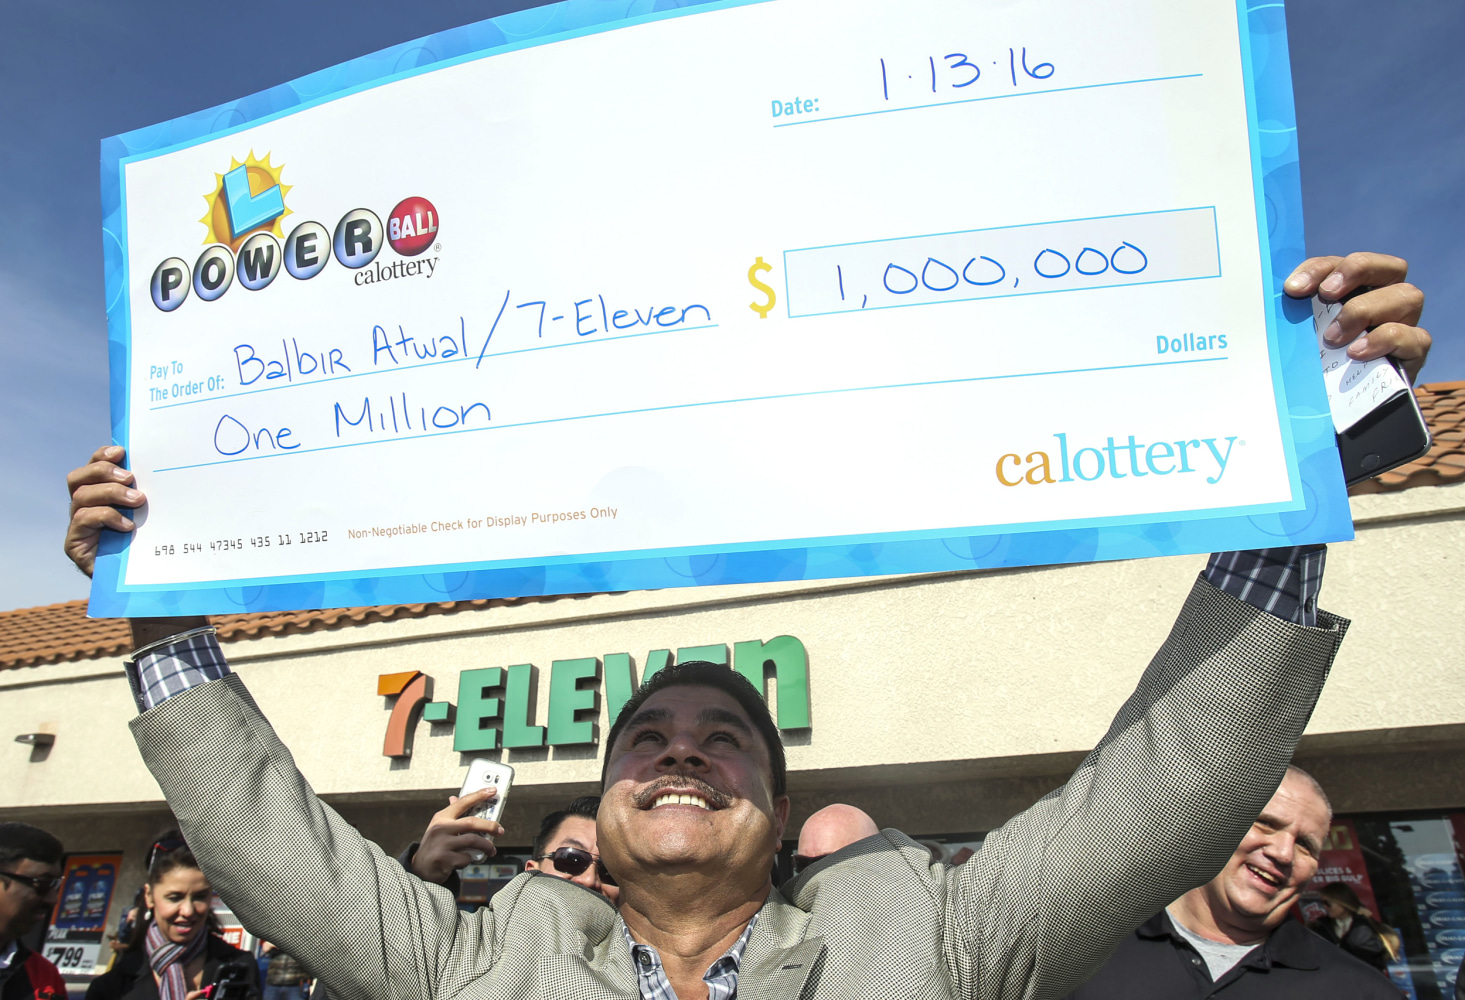 Powerball Jackpot Winners Remain Mystery, Dozens of Others Hit for $1 Million - NBC News